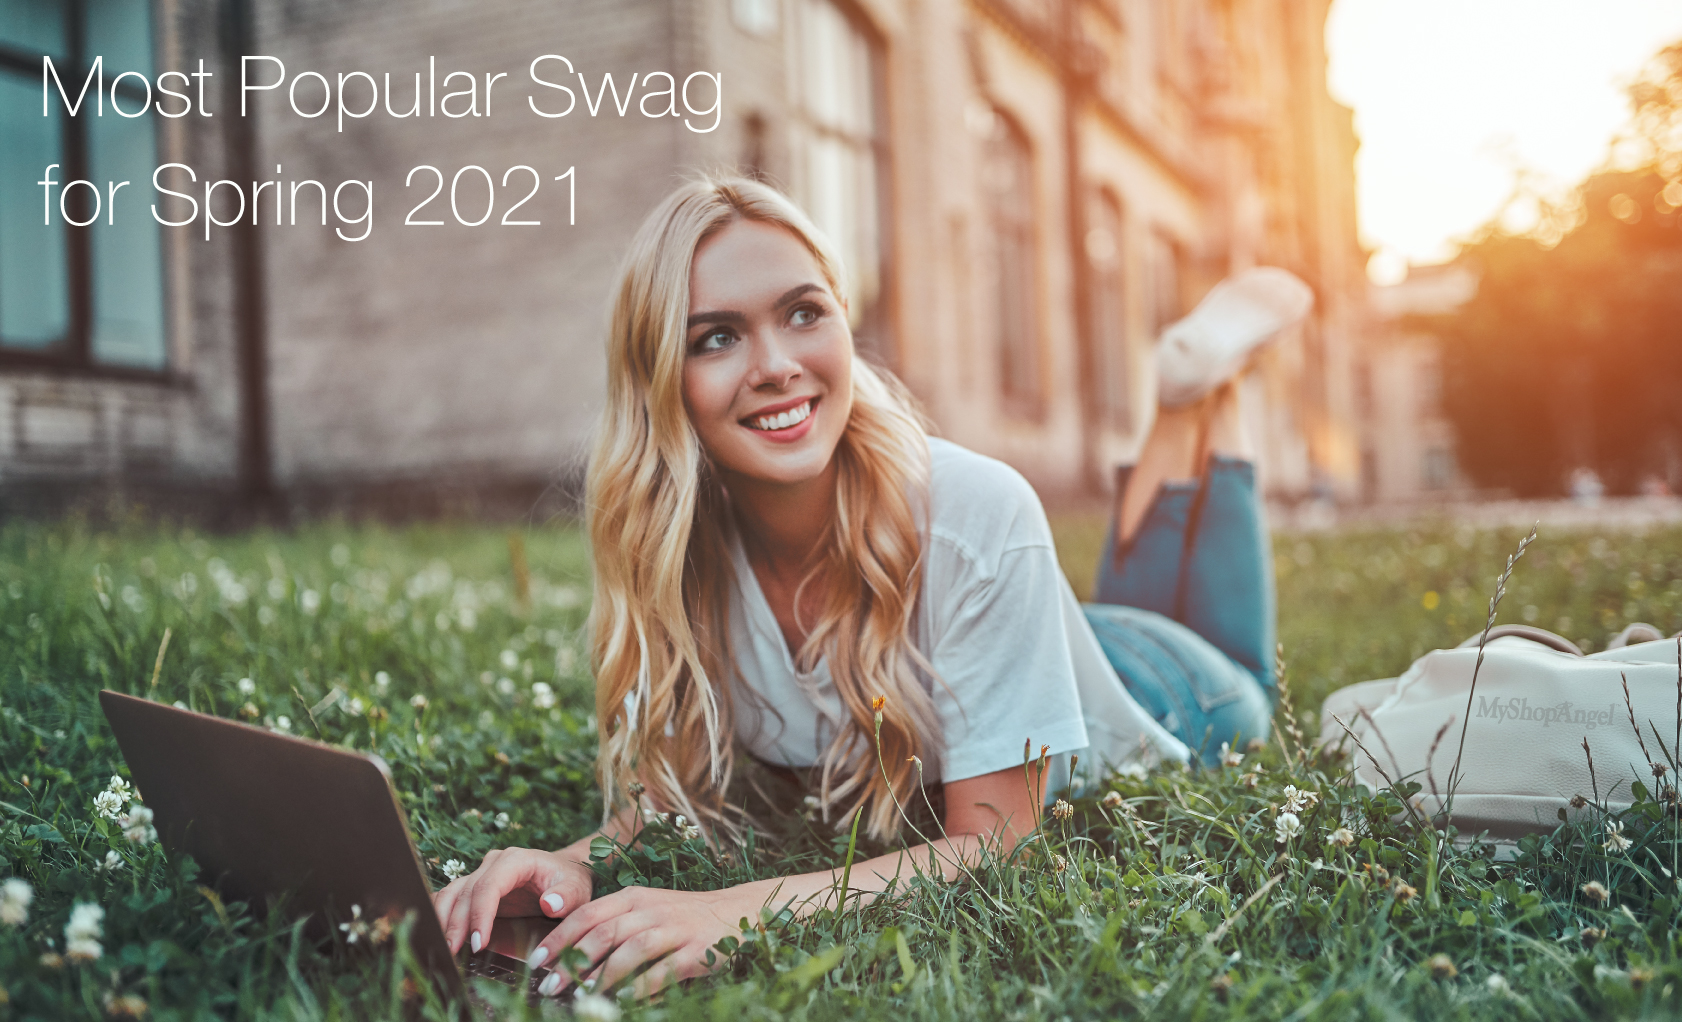 Most Popular Swag for Spring 2021